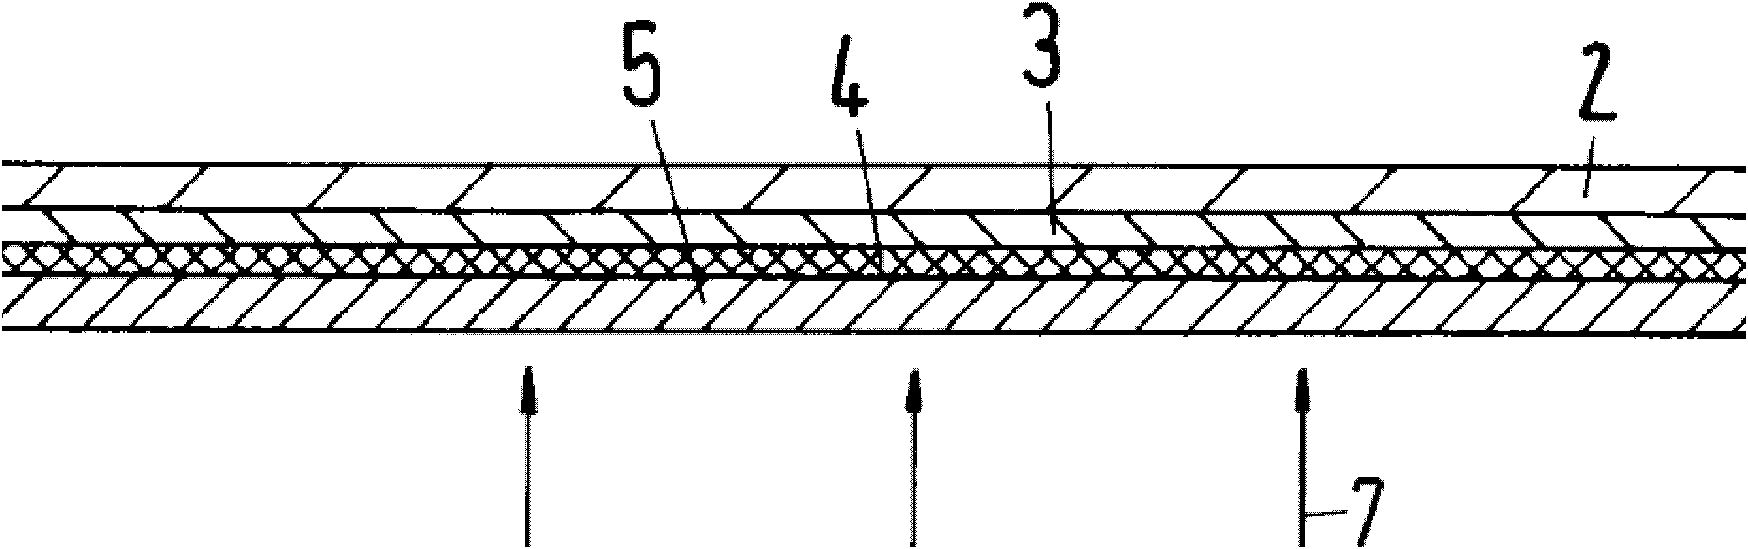 Composite system for photovoltaic modules